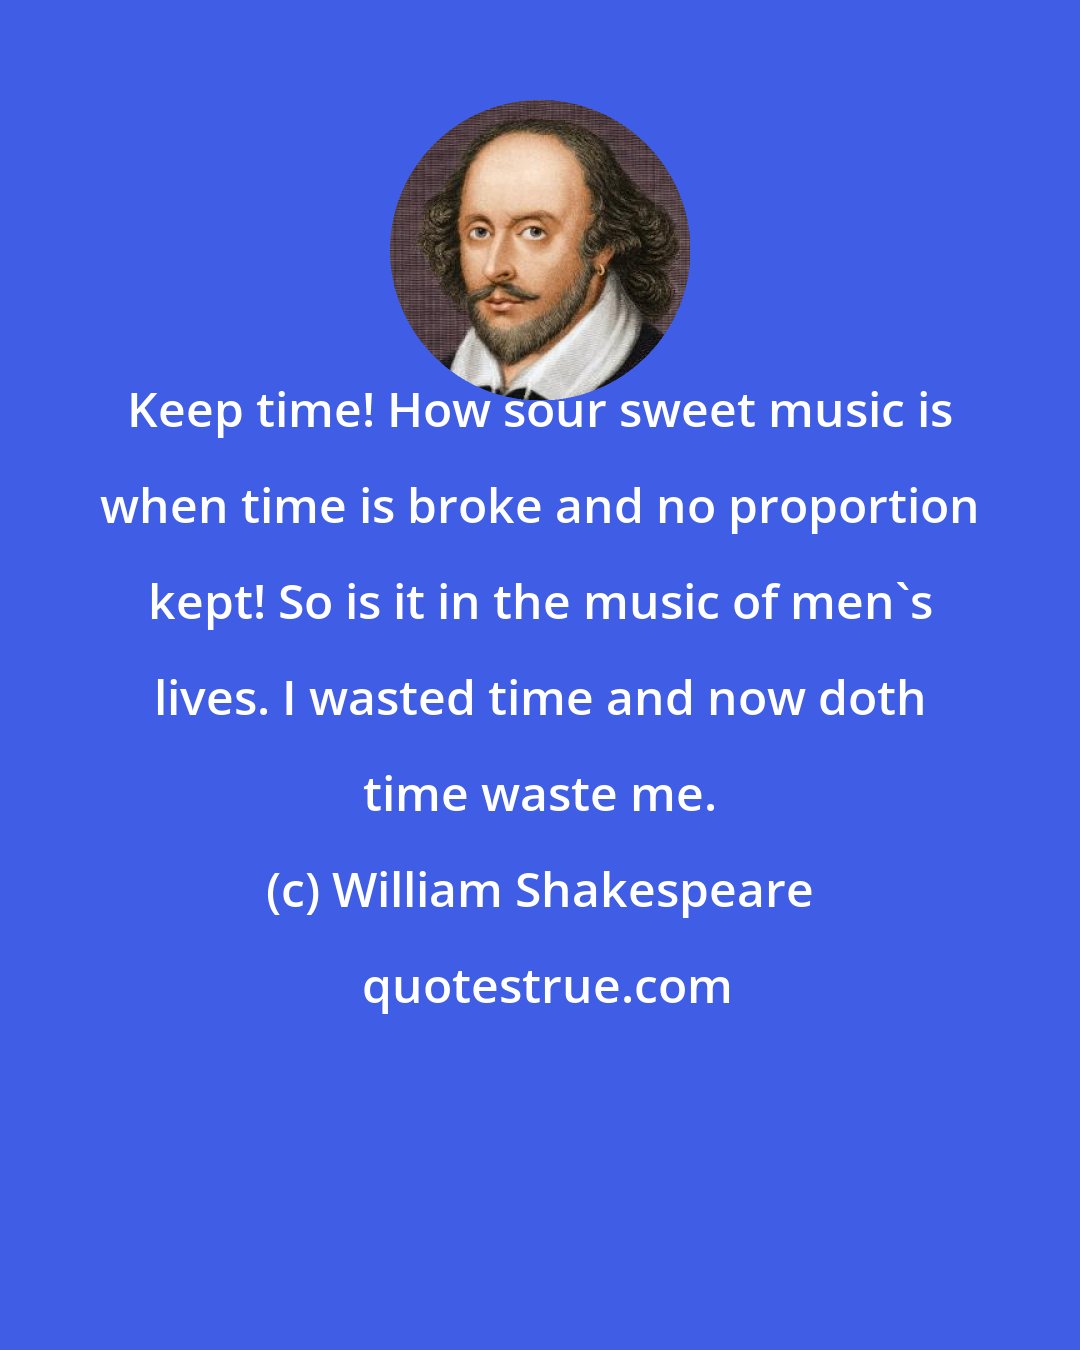 William Shakespeare: Keep time! How sour sweet music is when time is broke and no proportion kept! So is it in the music of men's lives. I wasted time and now doth time waste me.